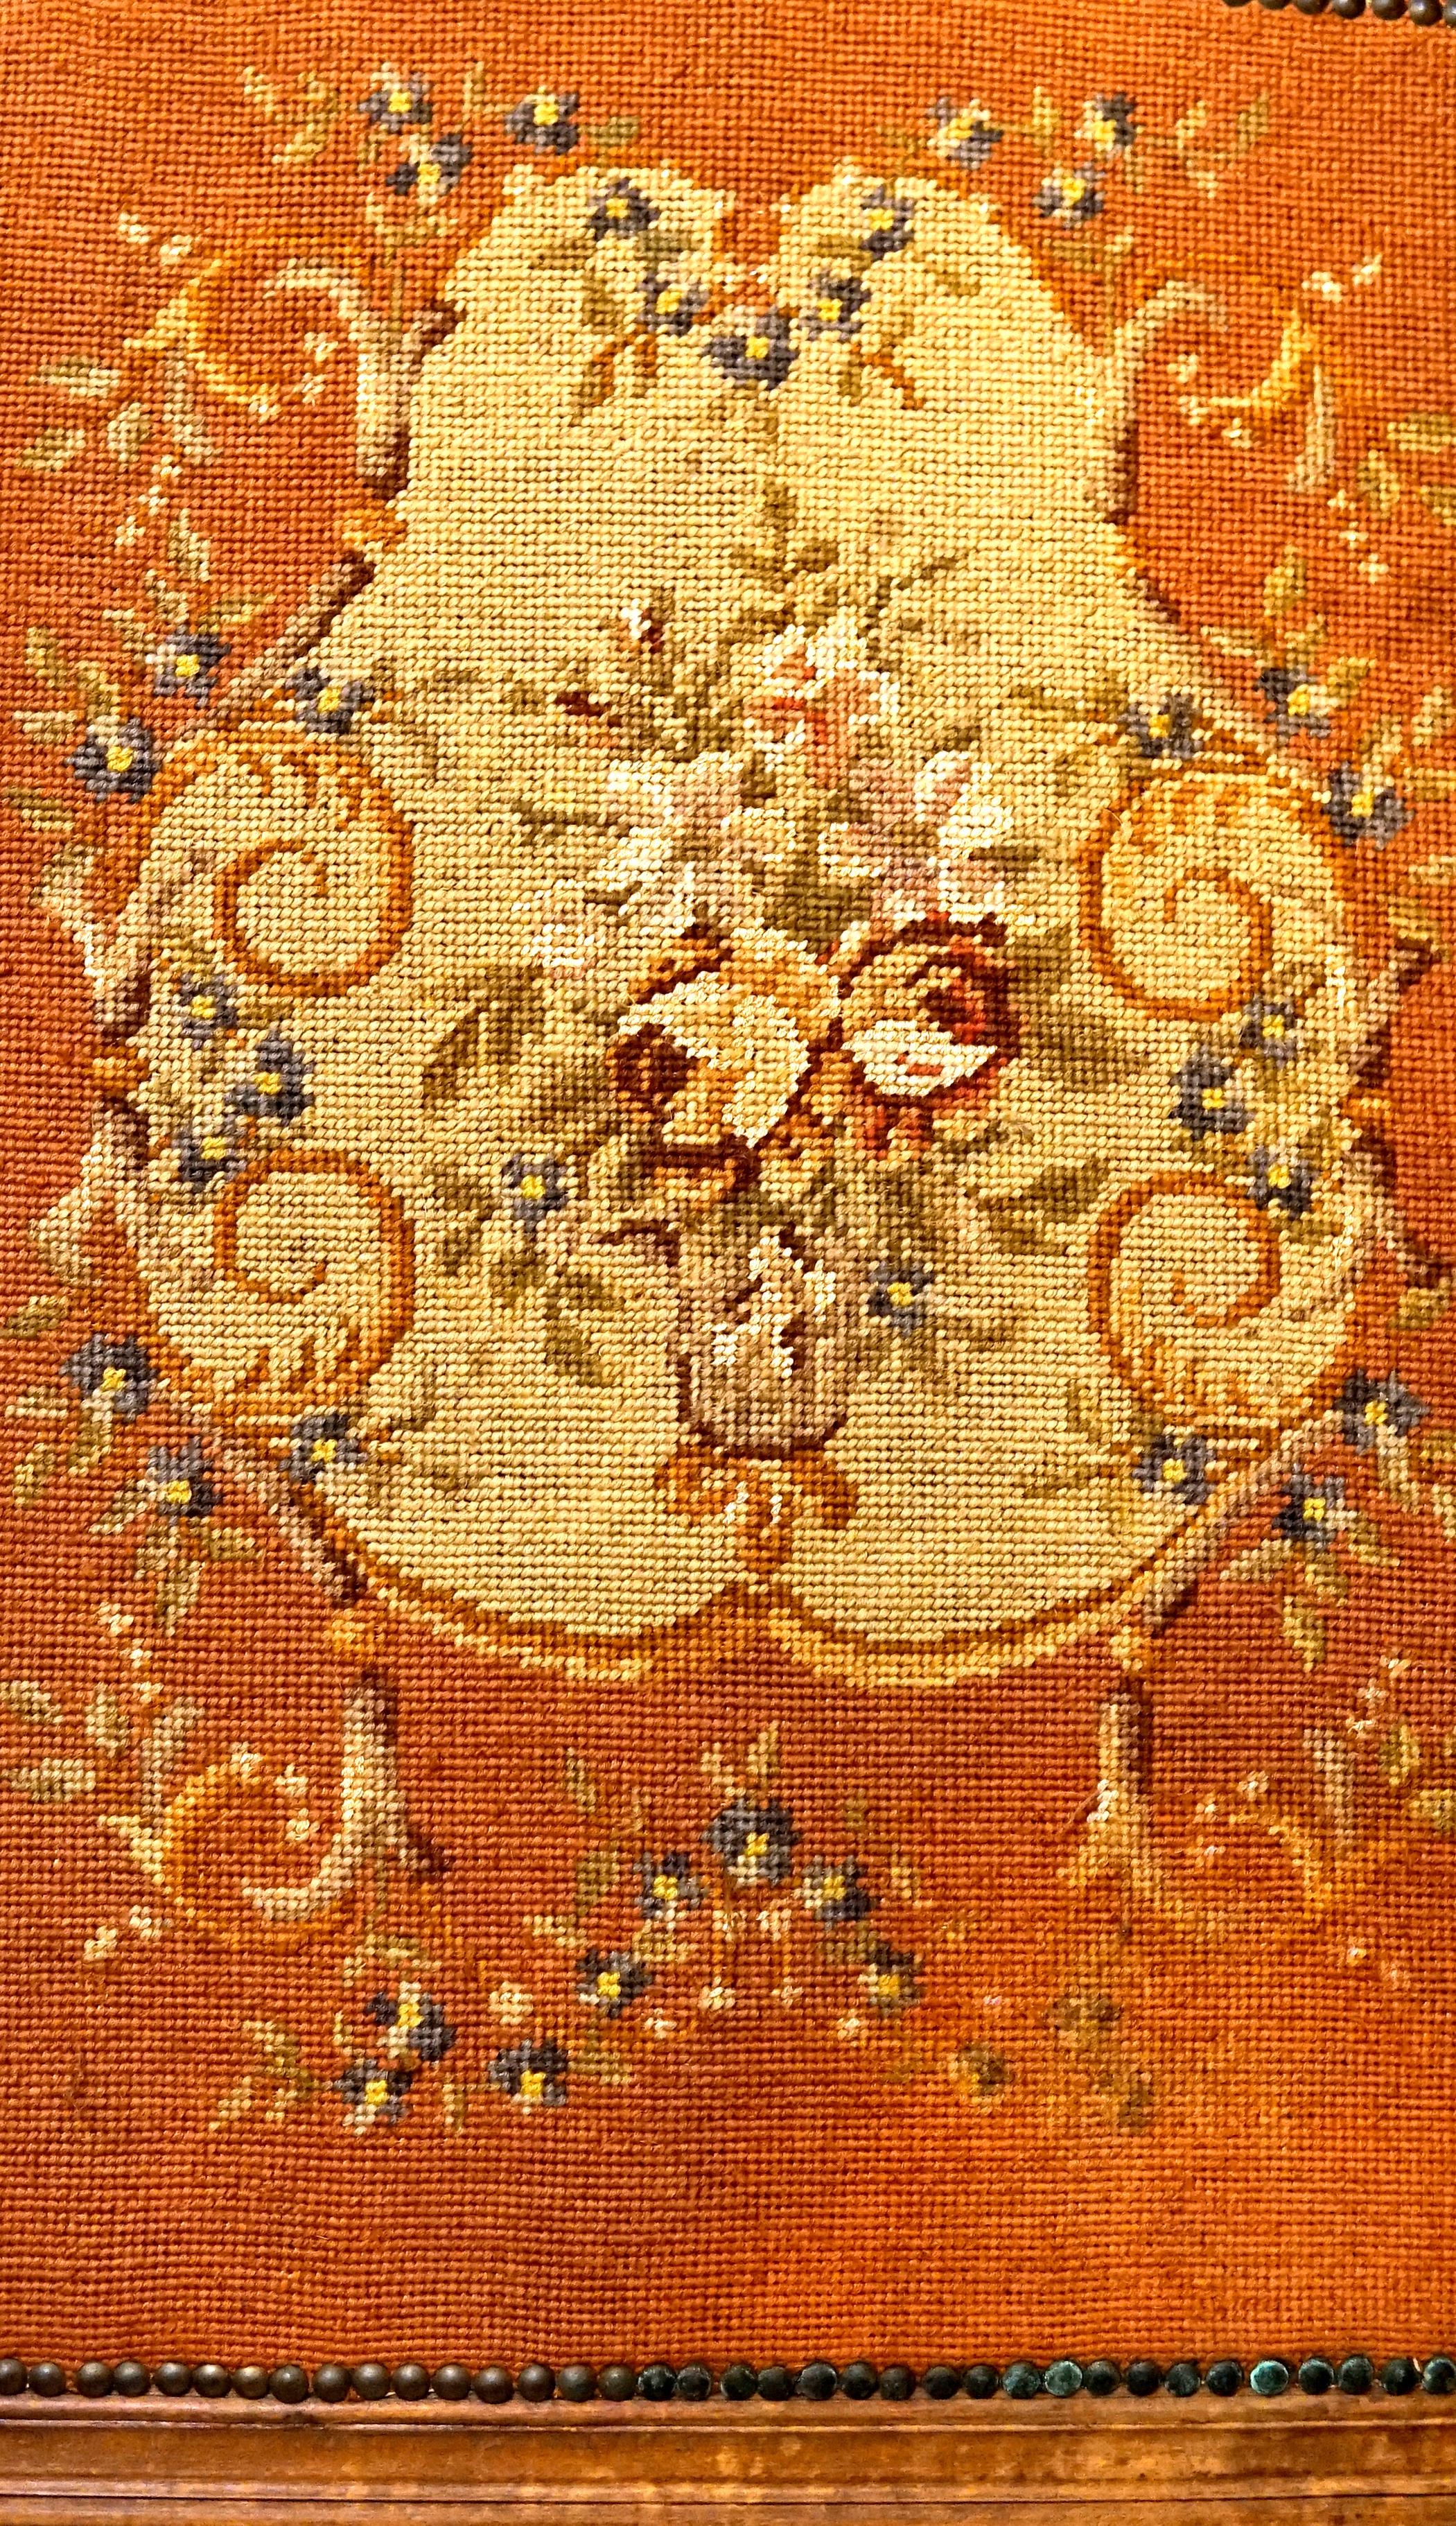 Everything about this screen is charming, from the bunch of needlepoint flowers, to the ribbon-like wood carving that frames the screen. This is an antique English piece from the Victorian era, circa the third quarter of the 19th Century. The screen